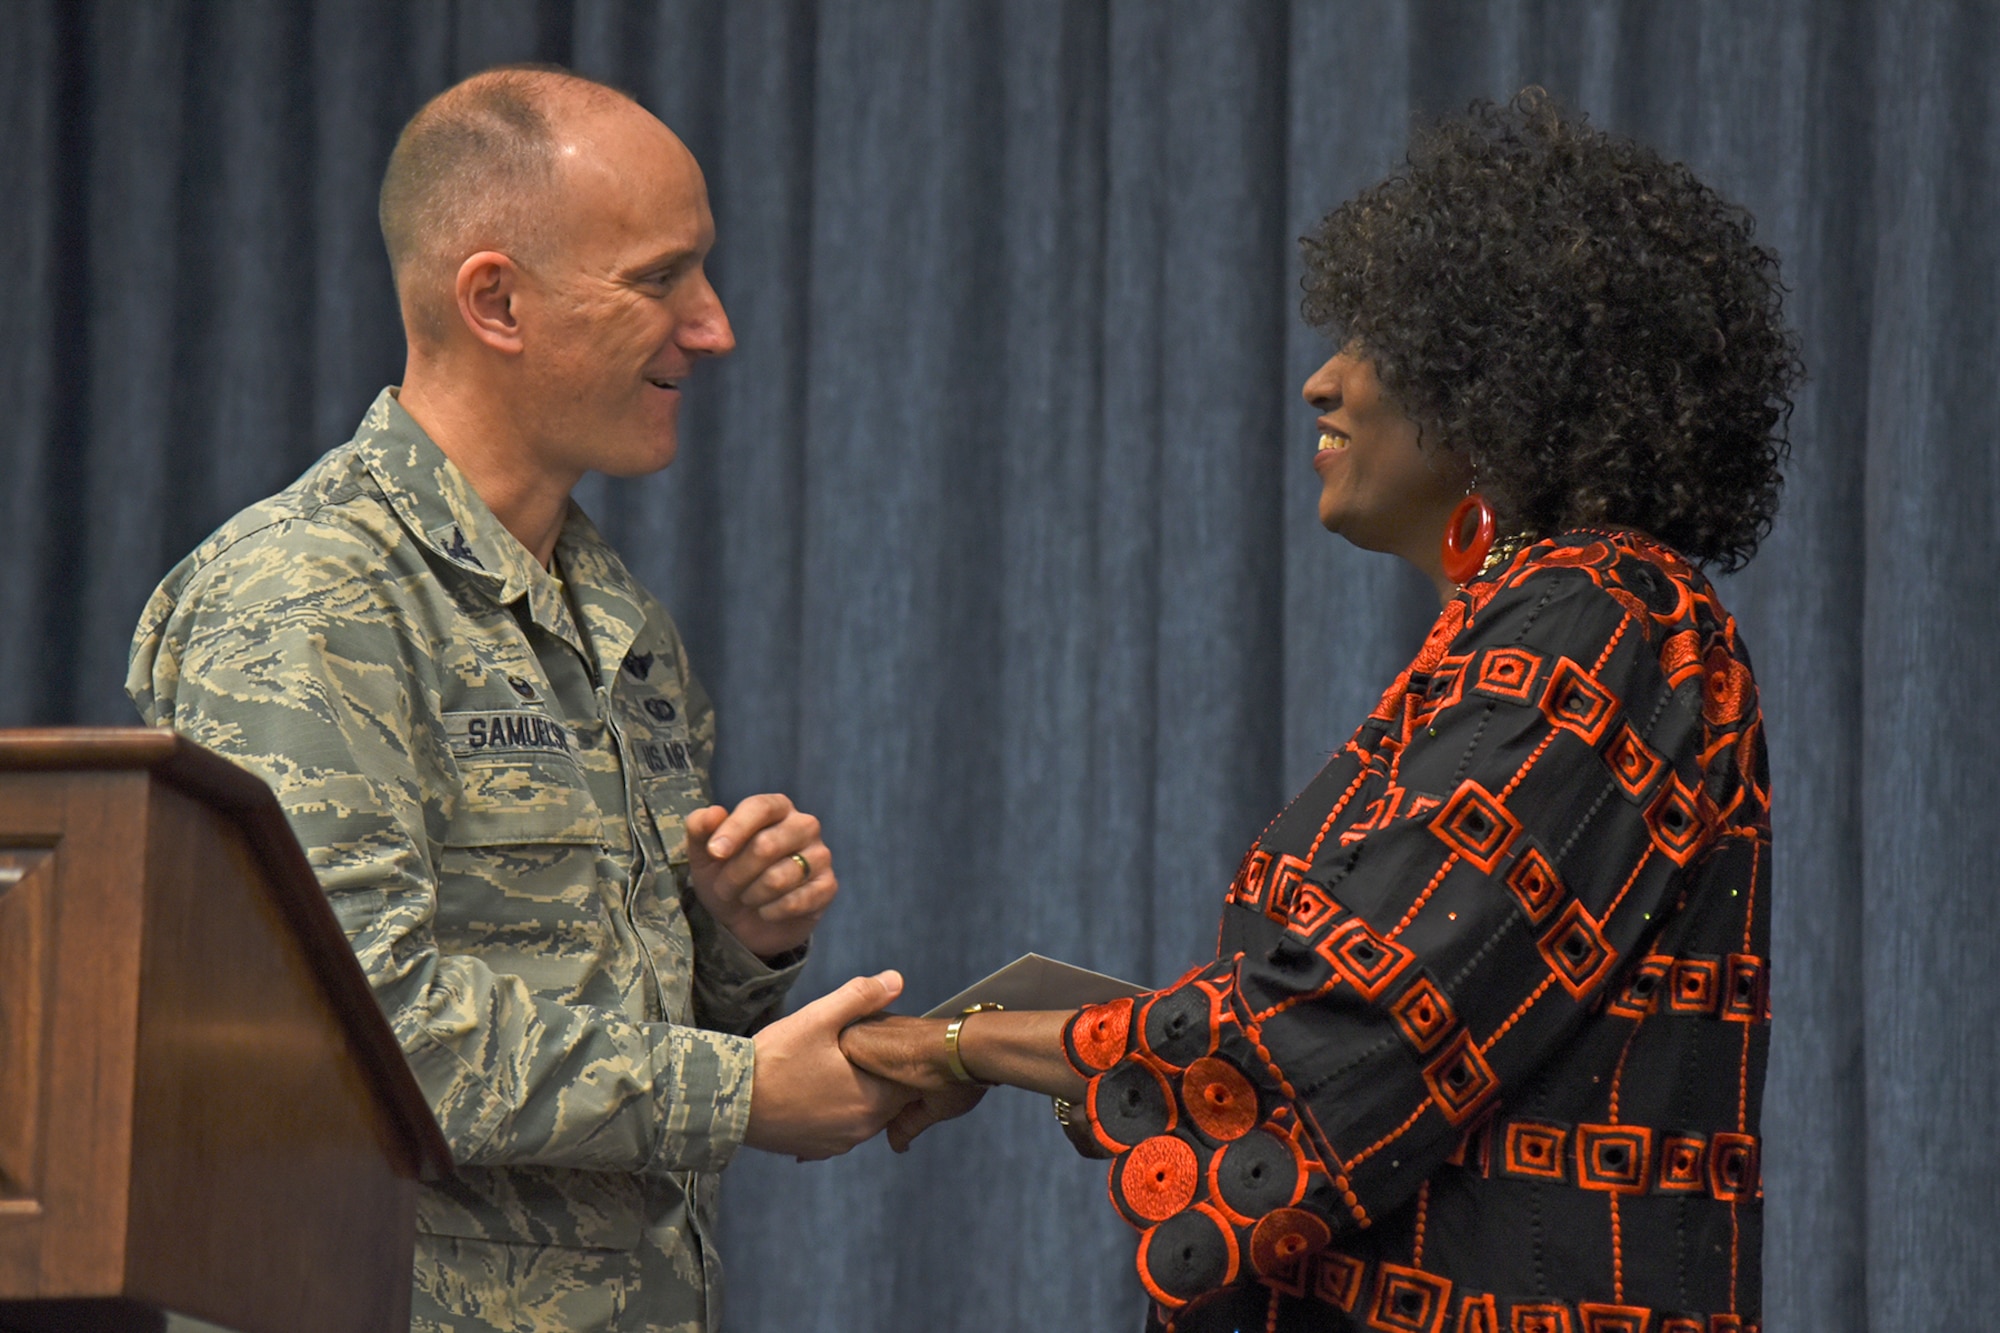 Col. Ryan Samuelson, 92nd Air Refueling Wing commander, thanks Stephanie Nobles-Beans, coordinator for Diversity, Equity and Inclusion for Campus Ministries at Whitworth University, for her contribution to the National Black History Month luncheon Feb. 23, 2017, at Fairchild Air Force Base, Washington. Nobles-Beans spoke on the importance of instilling self-confidence and knowledge of endless possibilities into education and today’s youth. (U.S. Air Force photo/Senior Airman Mackenzie Richardson)